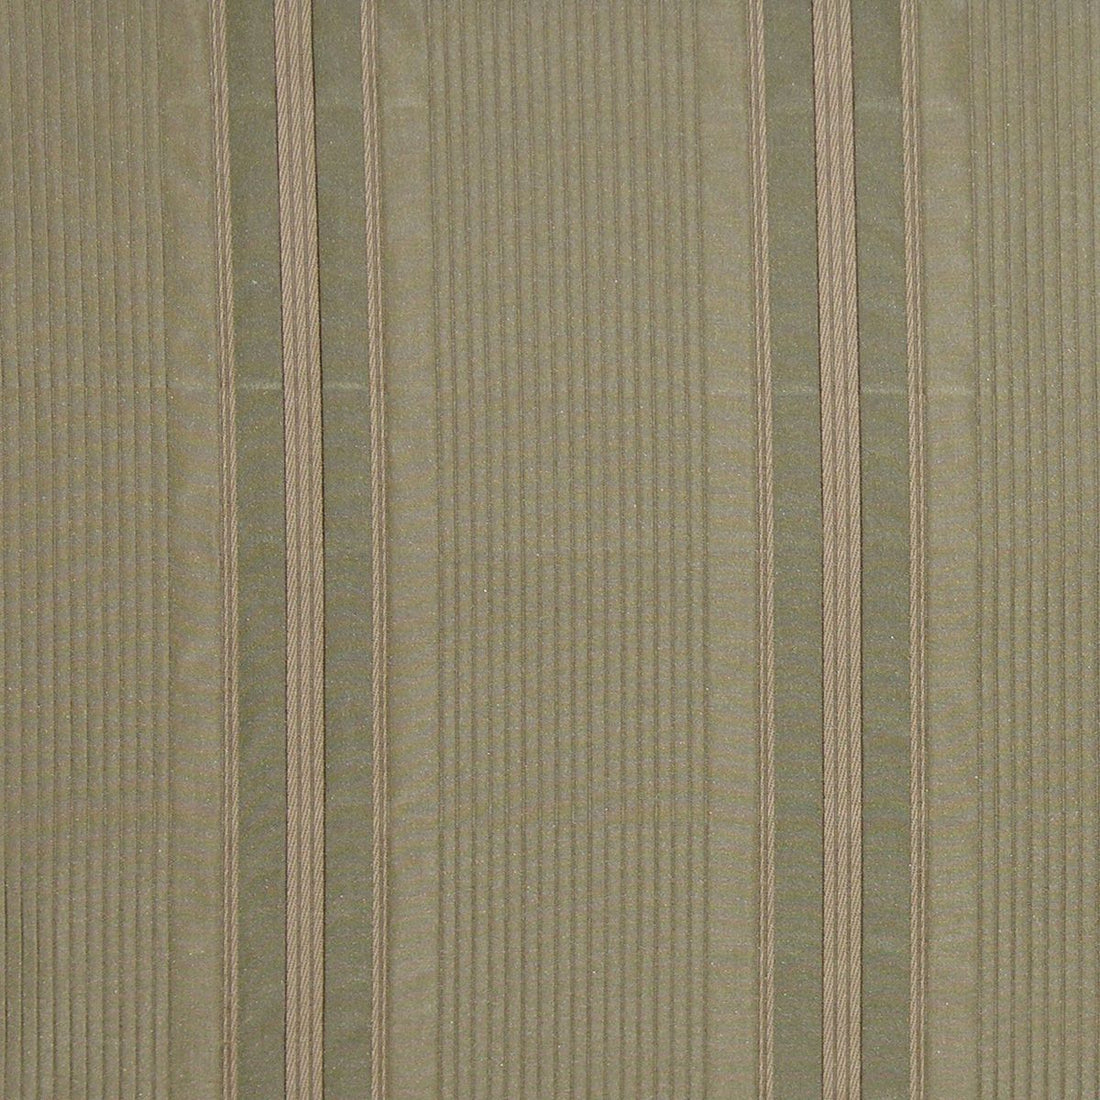 Malabar Stripe fabric in ginger color - pattern number HB 00091440 - by Scalamandre in the Old World Weavers collection